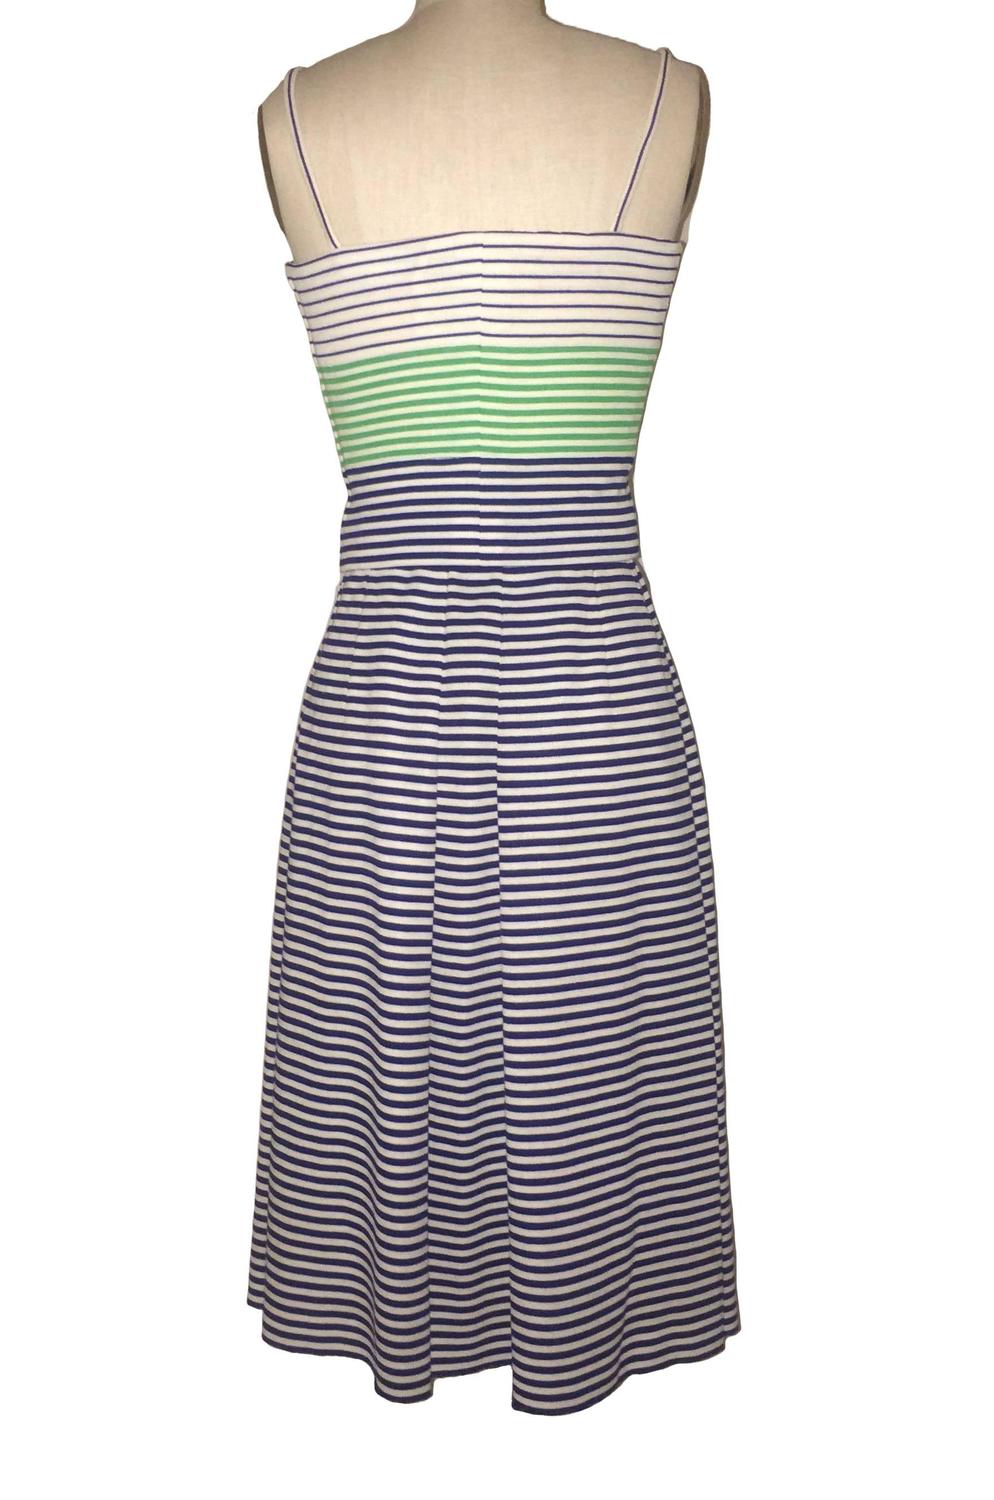 Lanvin 1960s Blue and White Striped Crop Tank Top and Skirt Dress ...